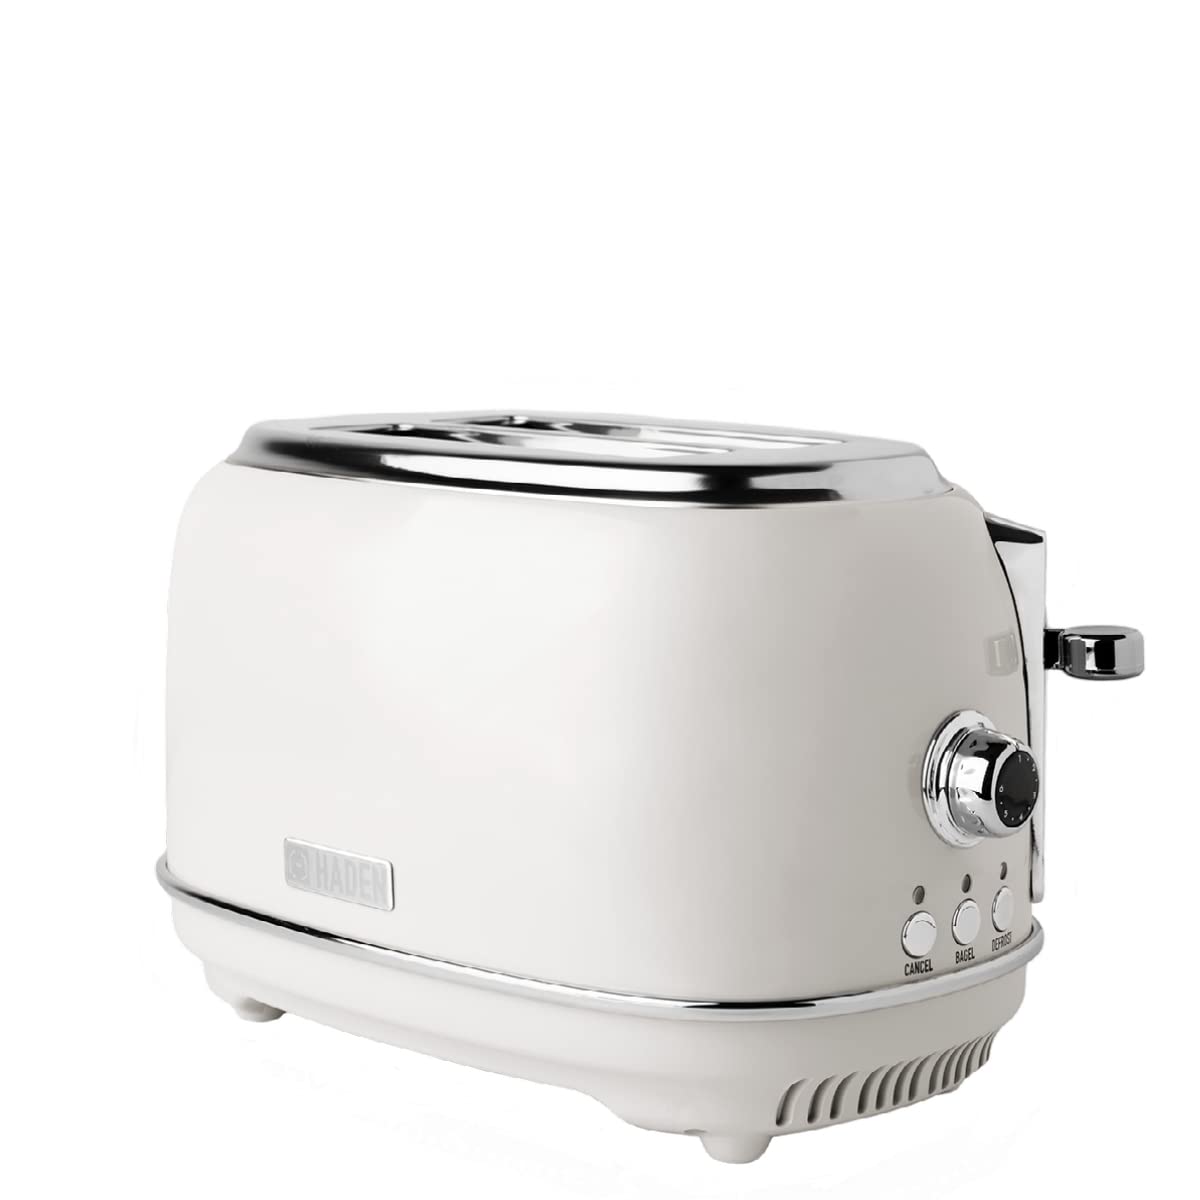 Haden Heritage White 2 Slice Toaster - Electric Stainless Steel Toaster - Economy Mode - Reheat, Cancel and Defrost Functions - Variable Browning Control - 1370-1630W